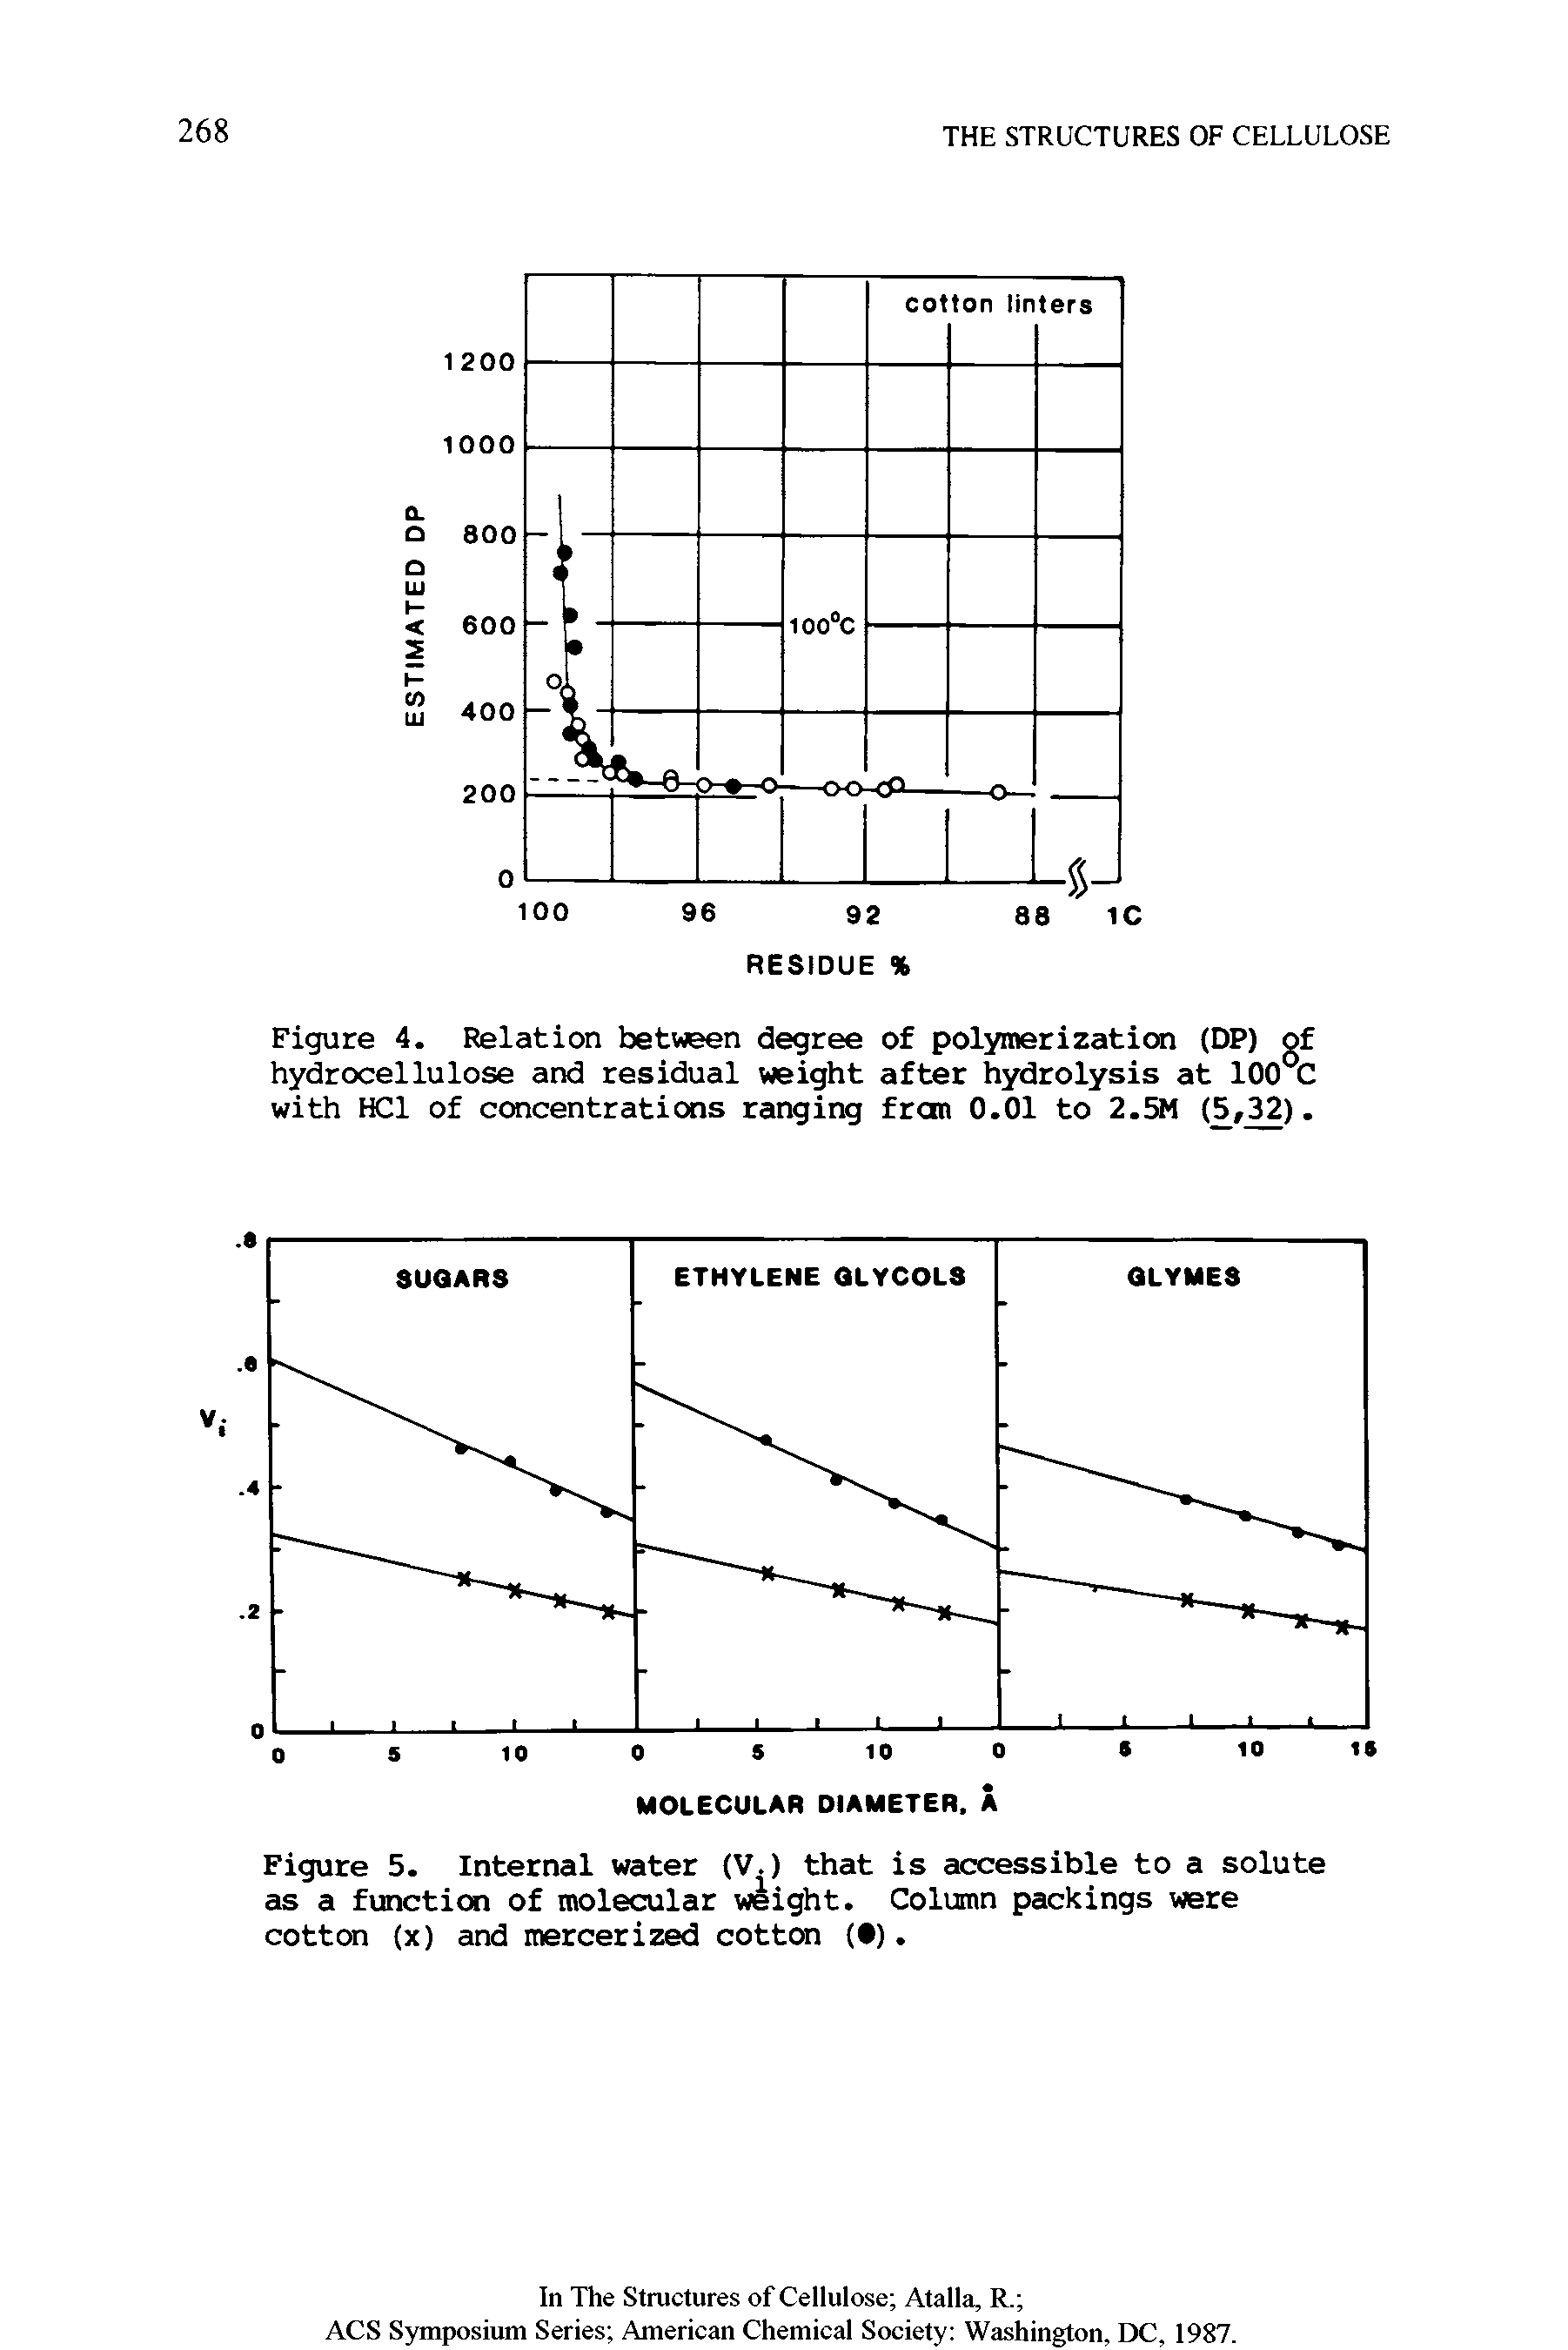 Figure 5. Internal water (V.) that is accessible to a solute as a function of molecular weight. Column packings were cotton (X) and mercerized cotton ( ).